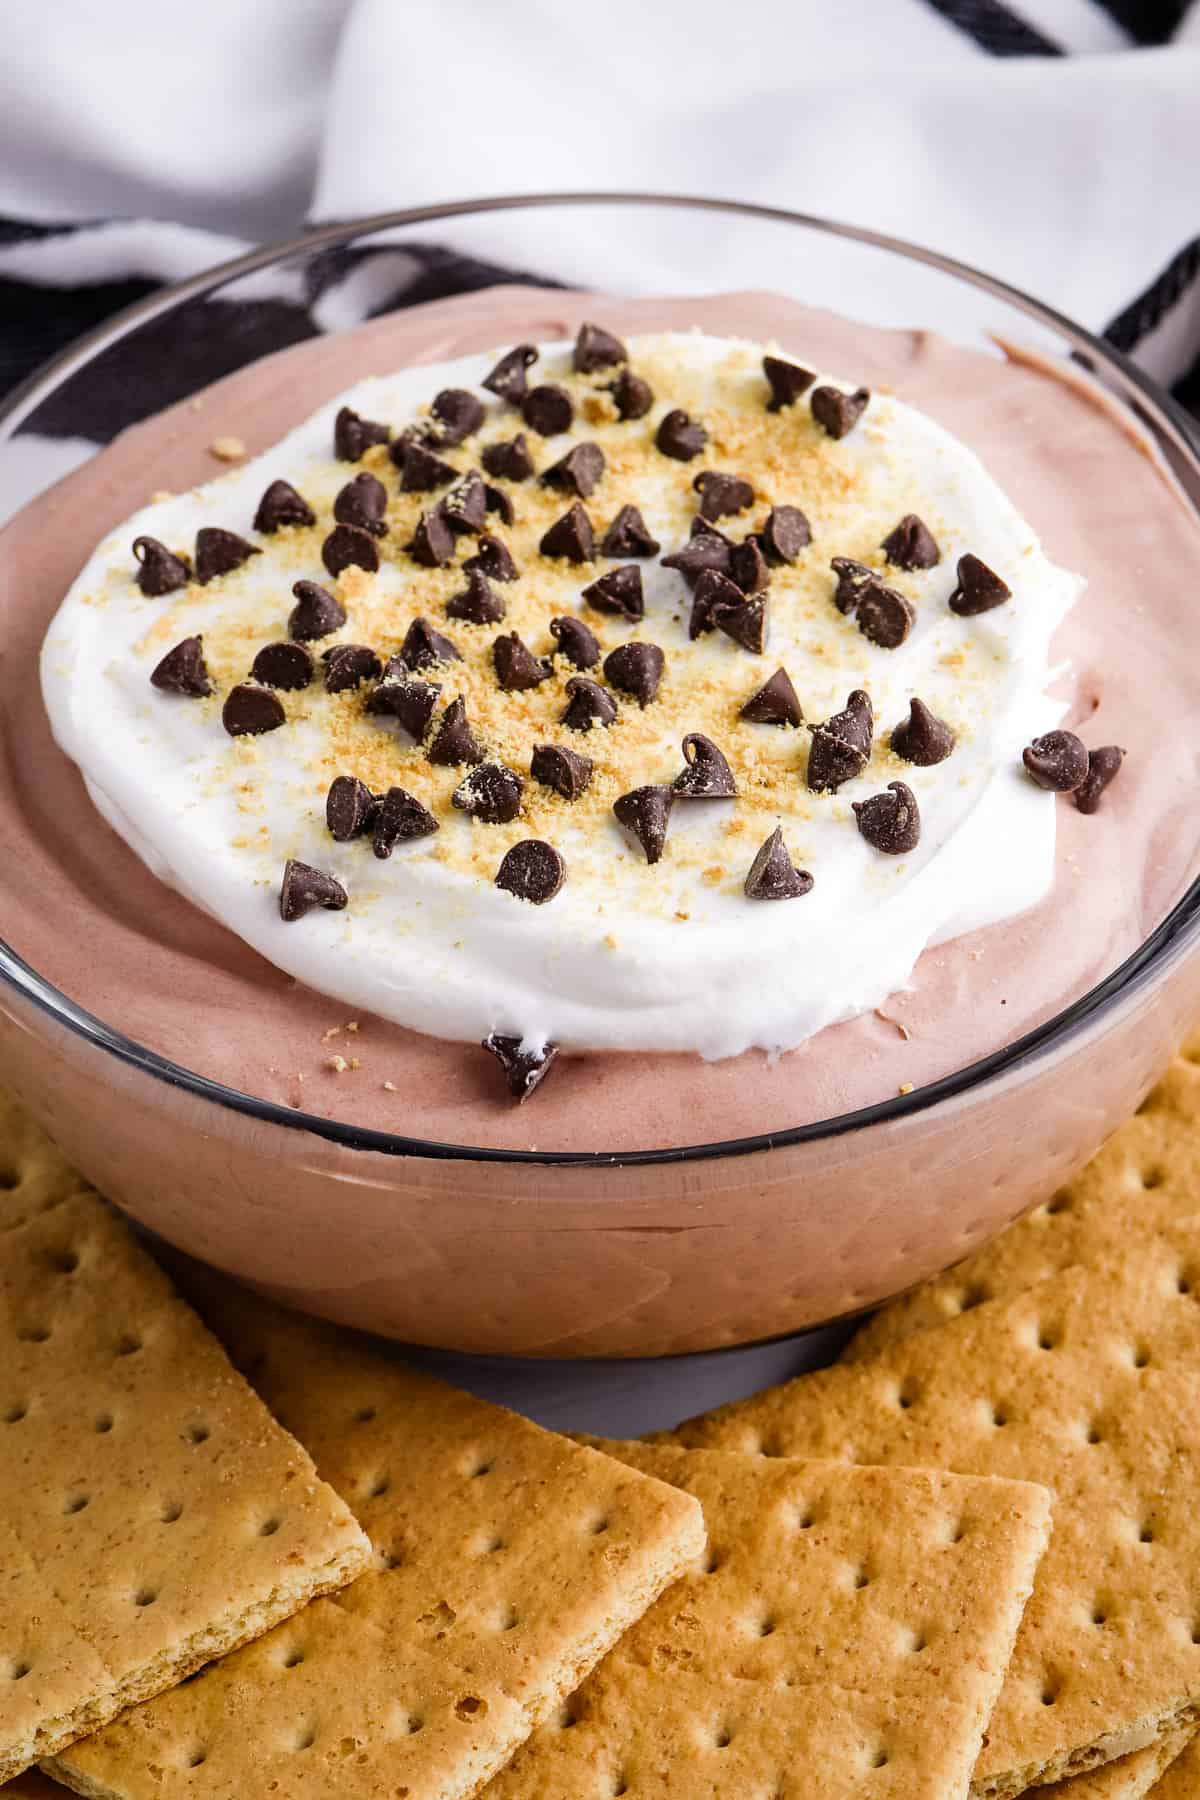 Chocolate Pie Dip served with graham crackers for dipping.